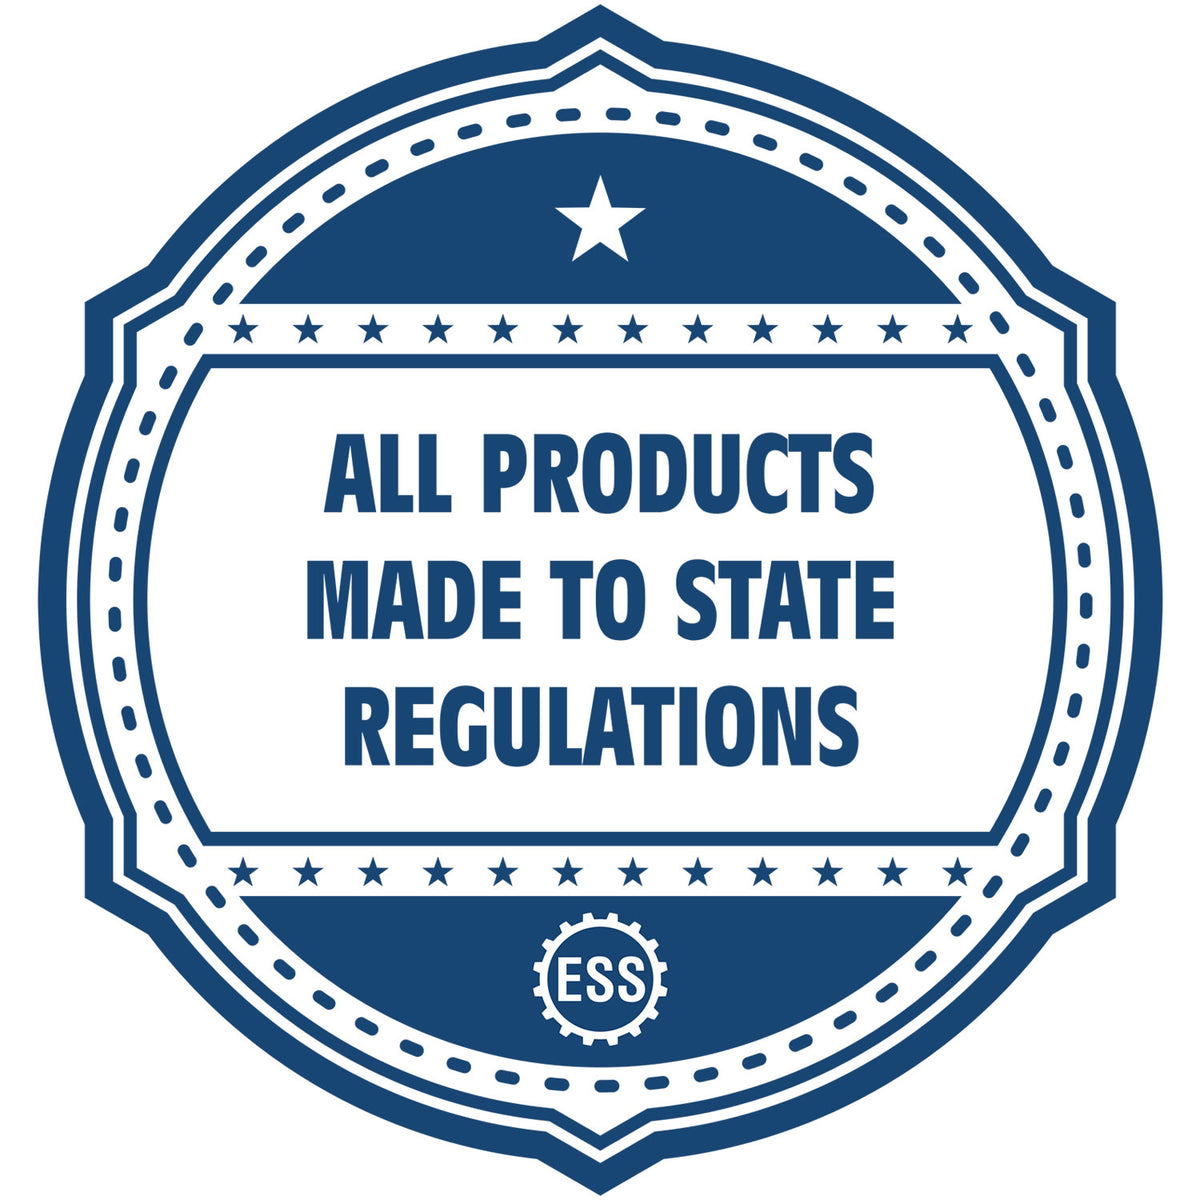 An icon or badge element for the PSI New York Notary Stamp showing that this product is made in compliance with state regulations.